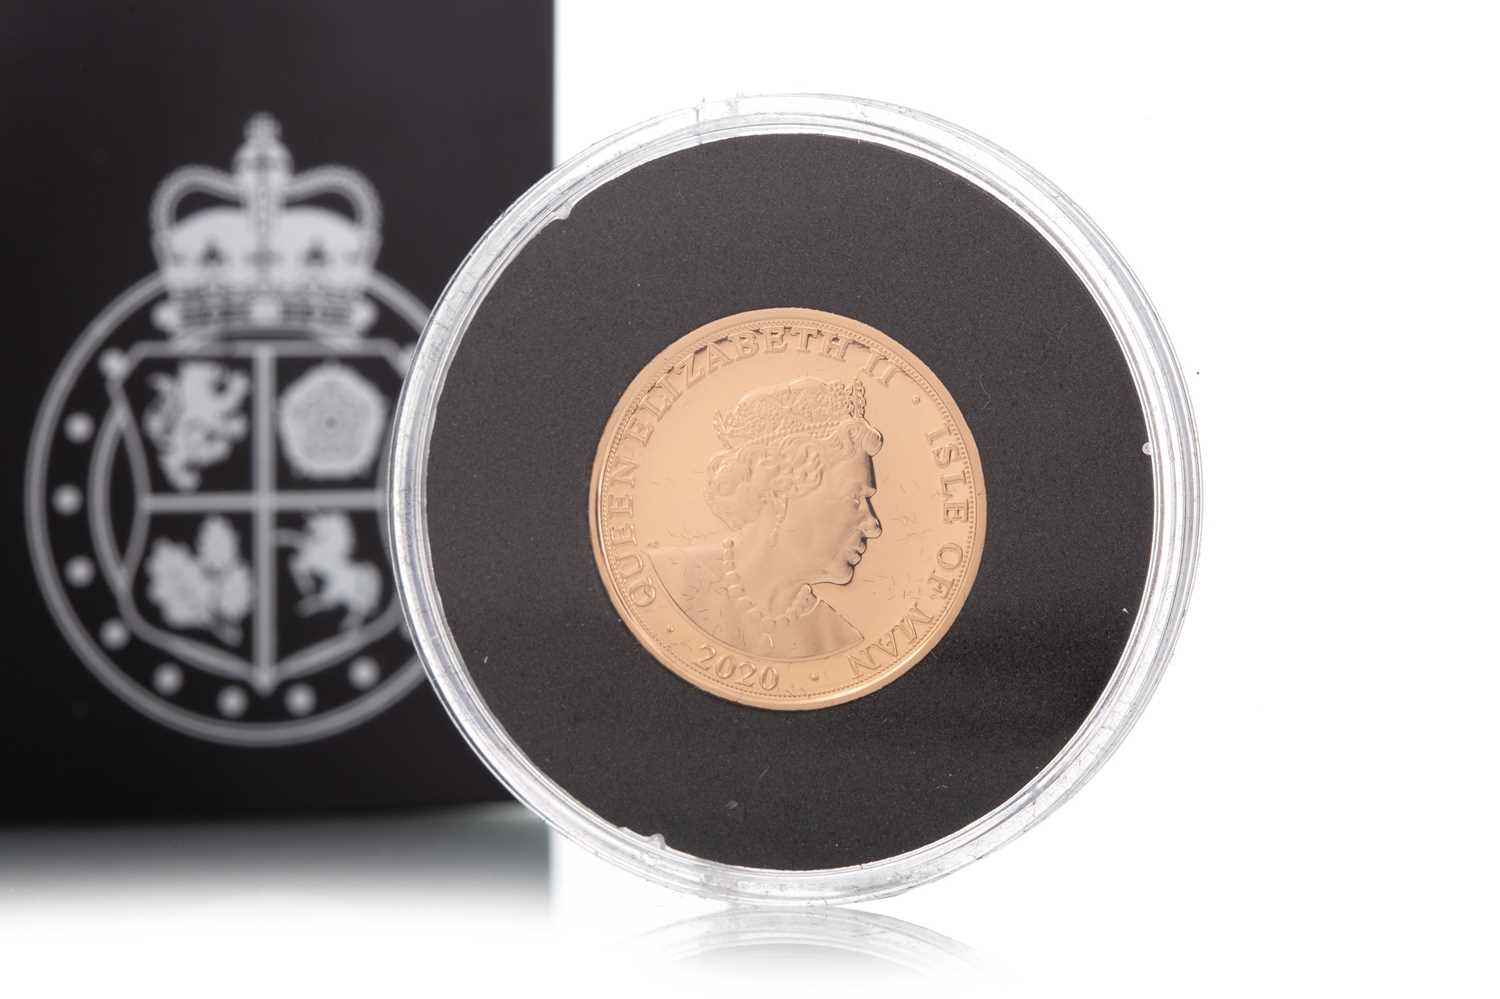 Lot 89 - VE DAY 75TH ANNIVERSARY GOLD PROOF SOVREIGN